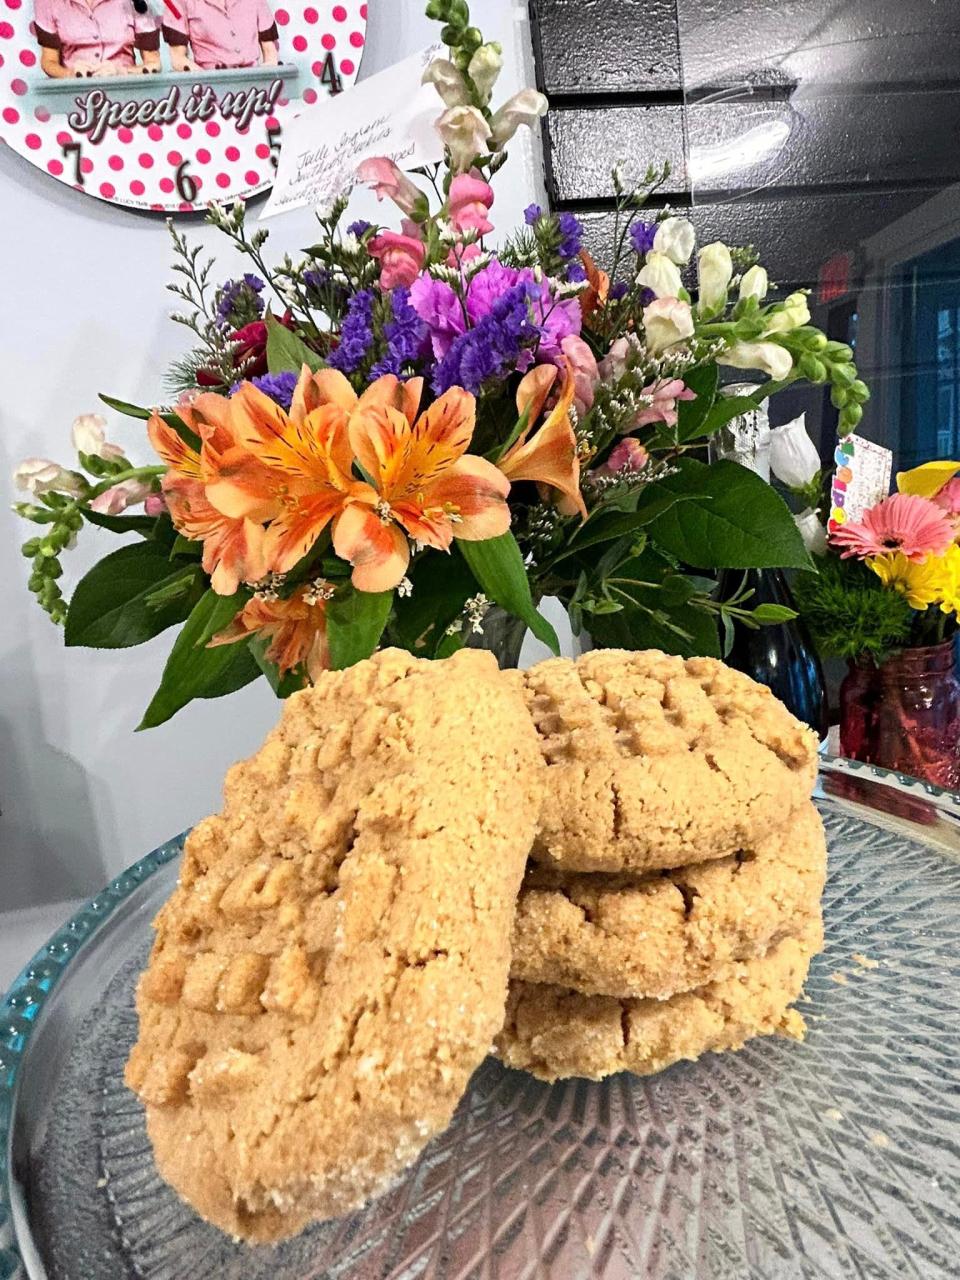 Gluten-free peanut butter cookies are one of the signature selections at Southport Cookies at 1102 N Howe St. in the Olde Southport Village Shoppes.